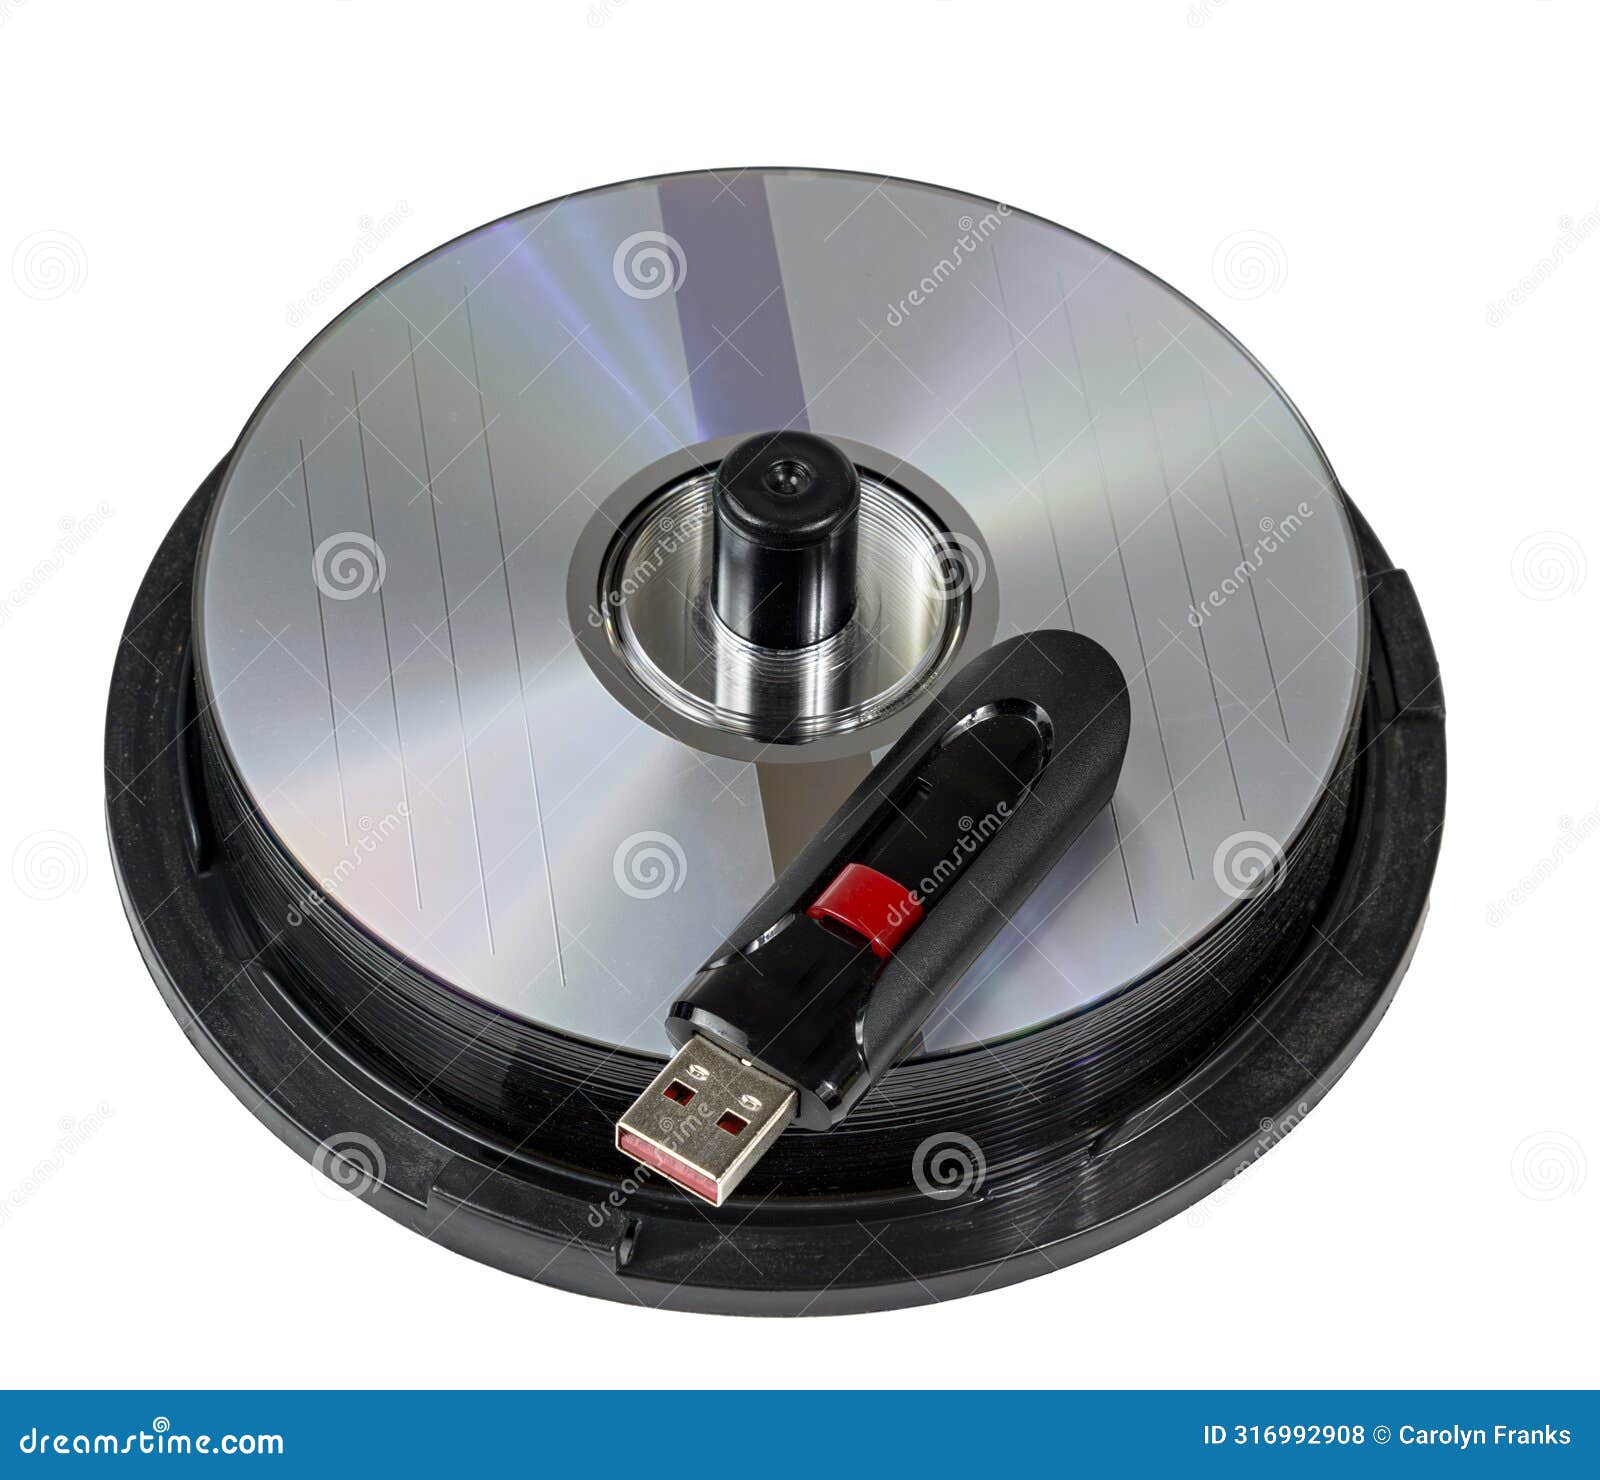 high-capacity usb flash drive on stack of cd discs